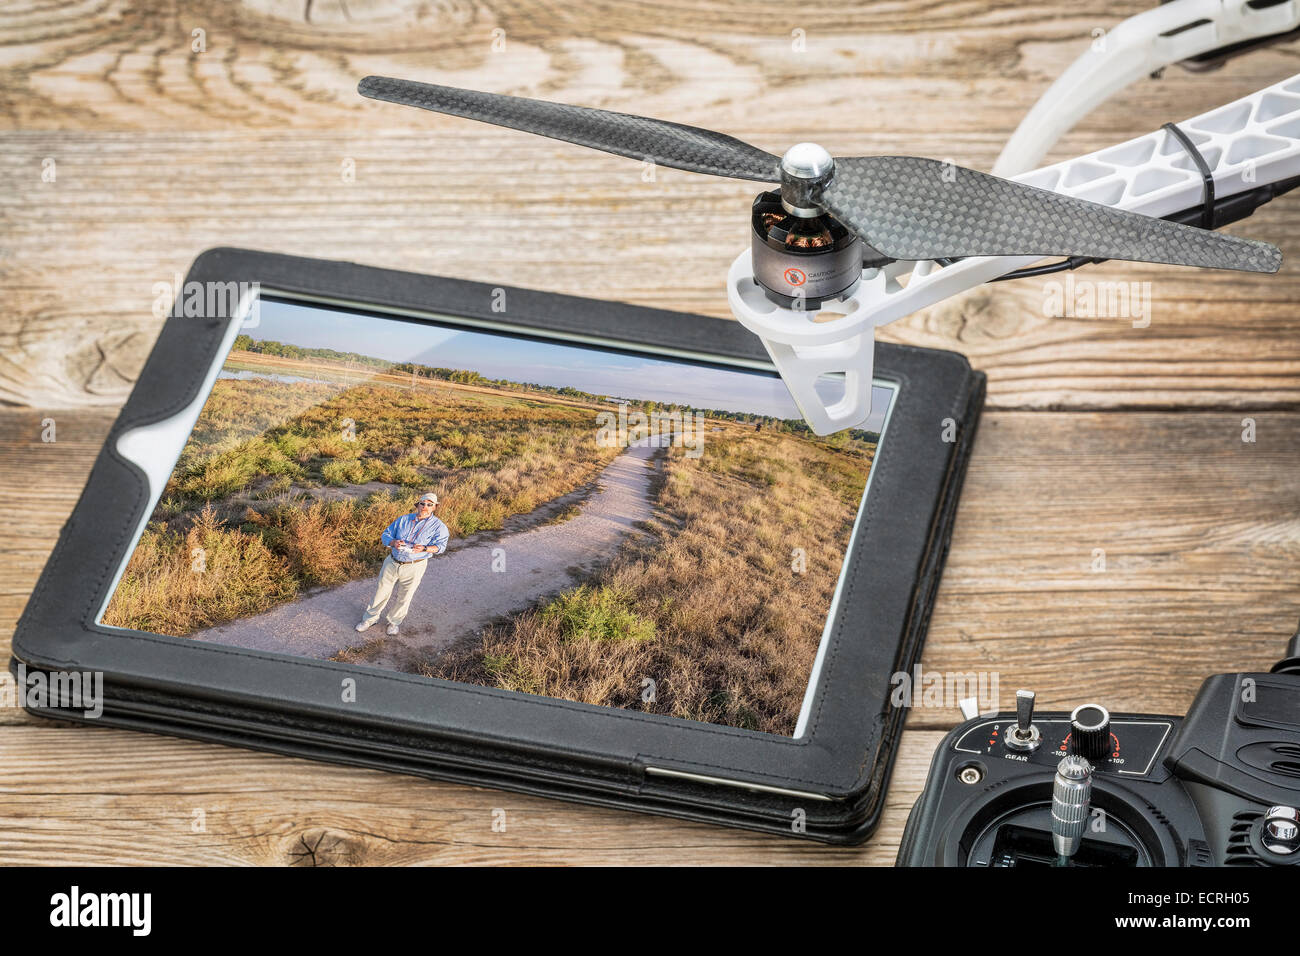 drone aerial photography concept - reviewing aerial picture (drone operator in a field) on a digital tablet Stock Photo